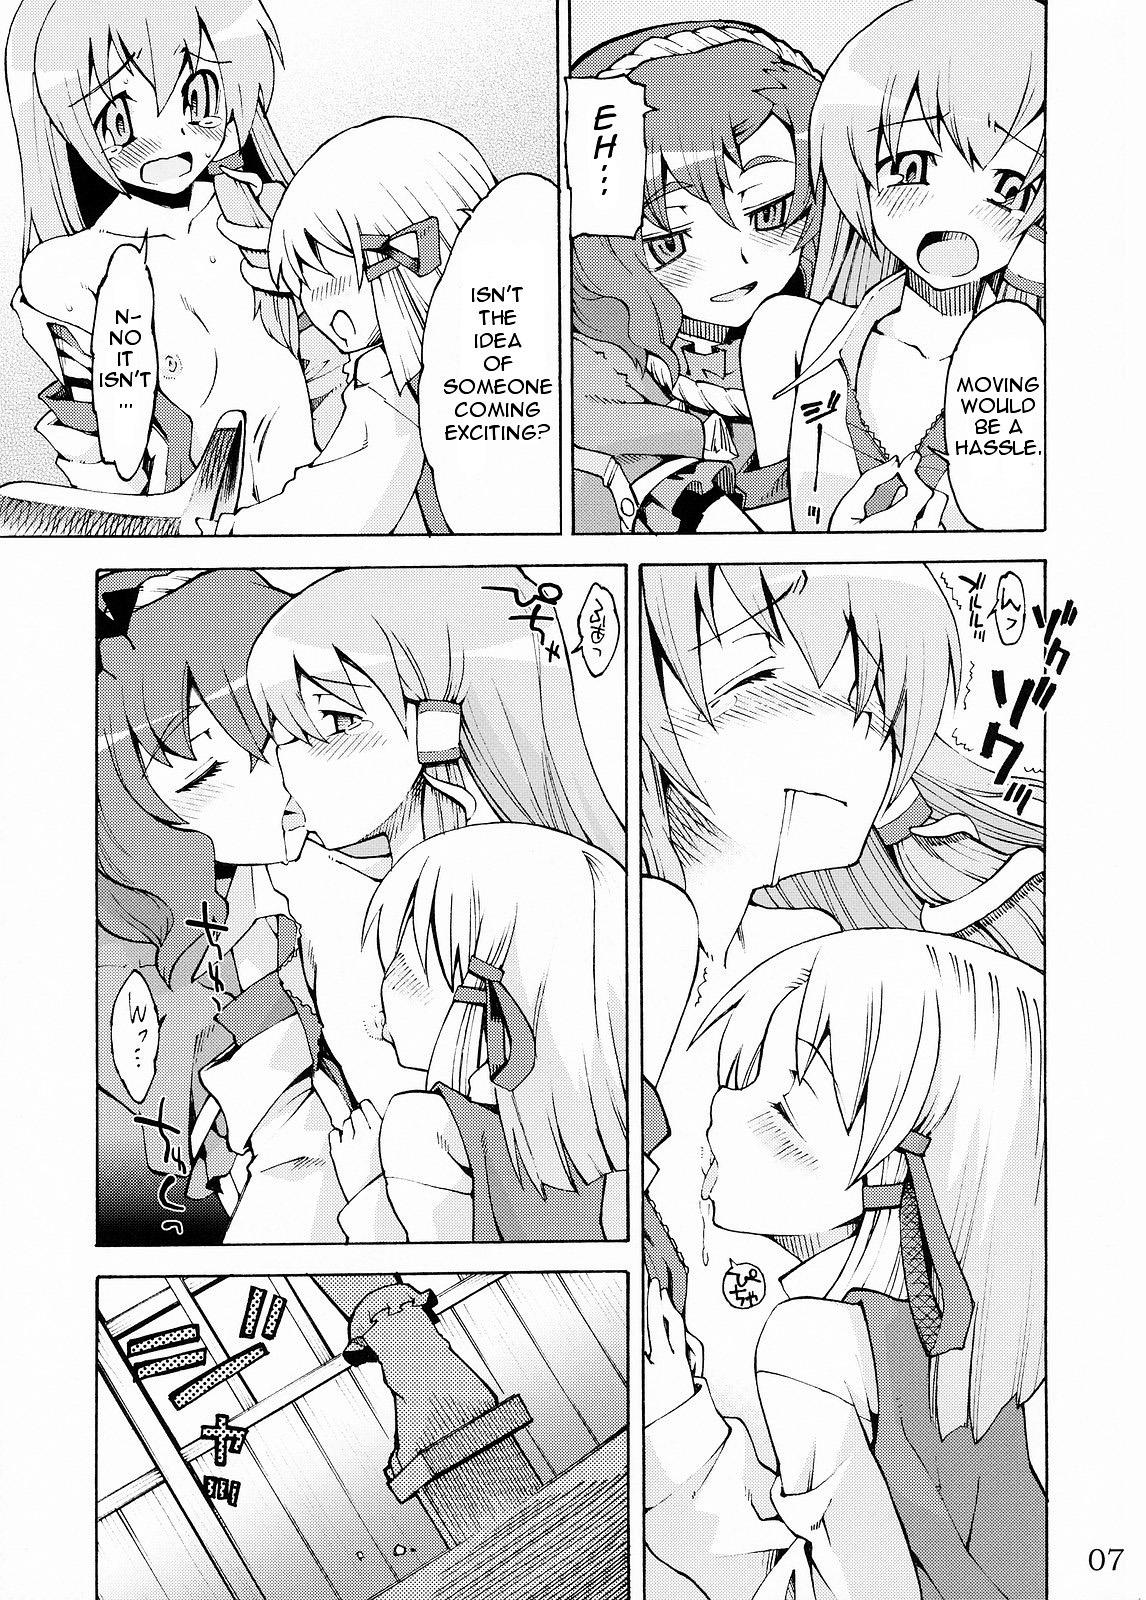 Outdoor Kami-sama to Issho! Happy every day! - Touhou project Assfucked - Page 7